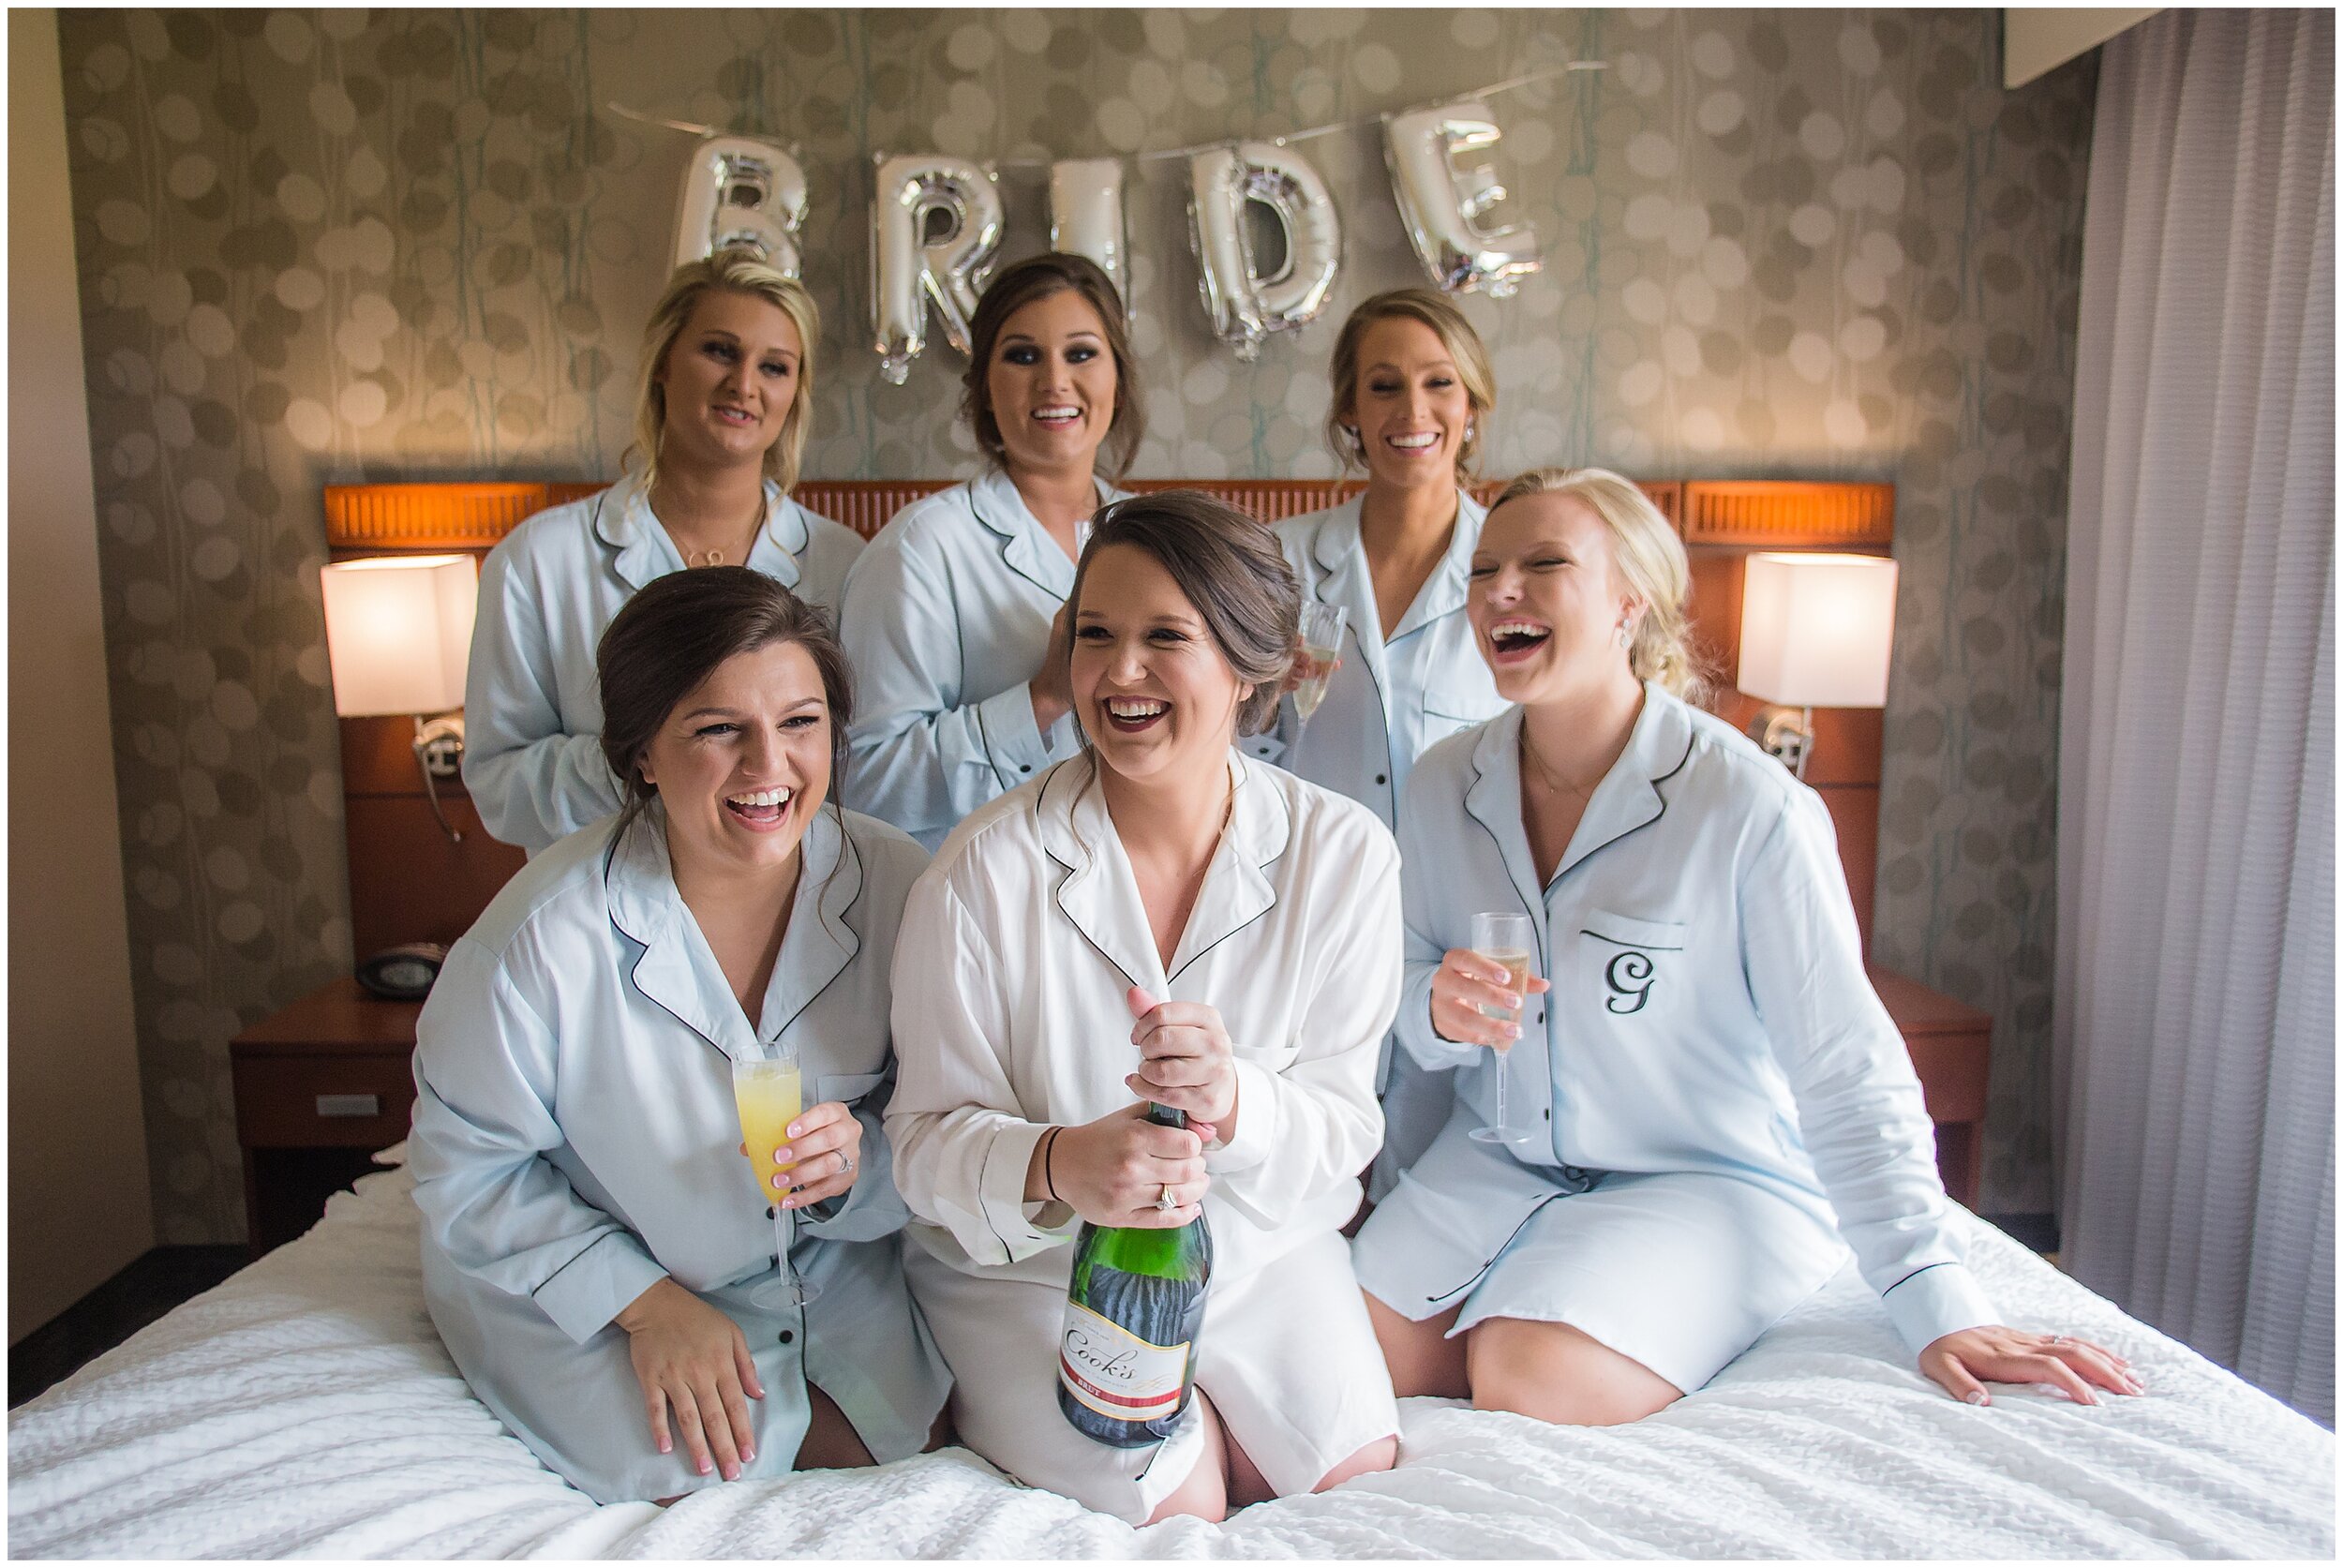 photo of bride holding champagne bottle surrounded by bridesmaids laughing on wedding day